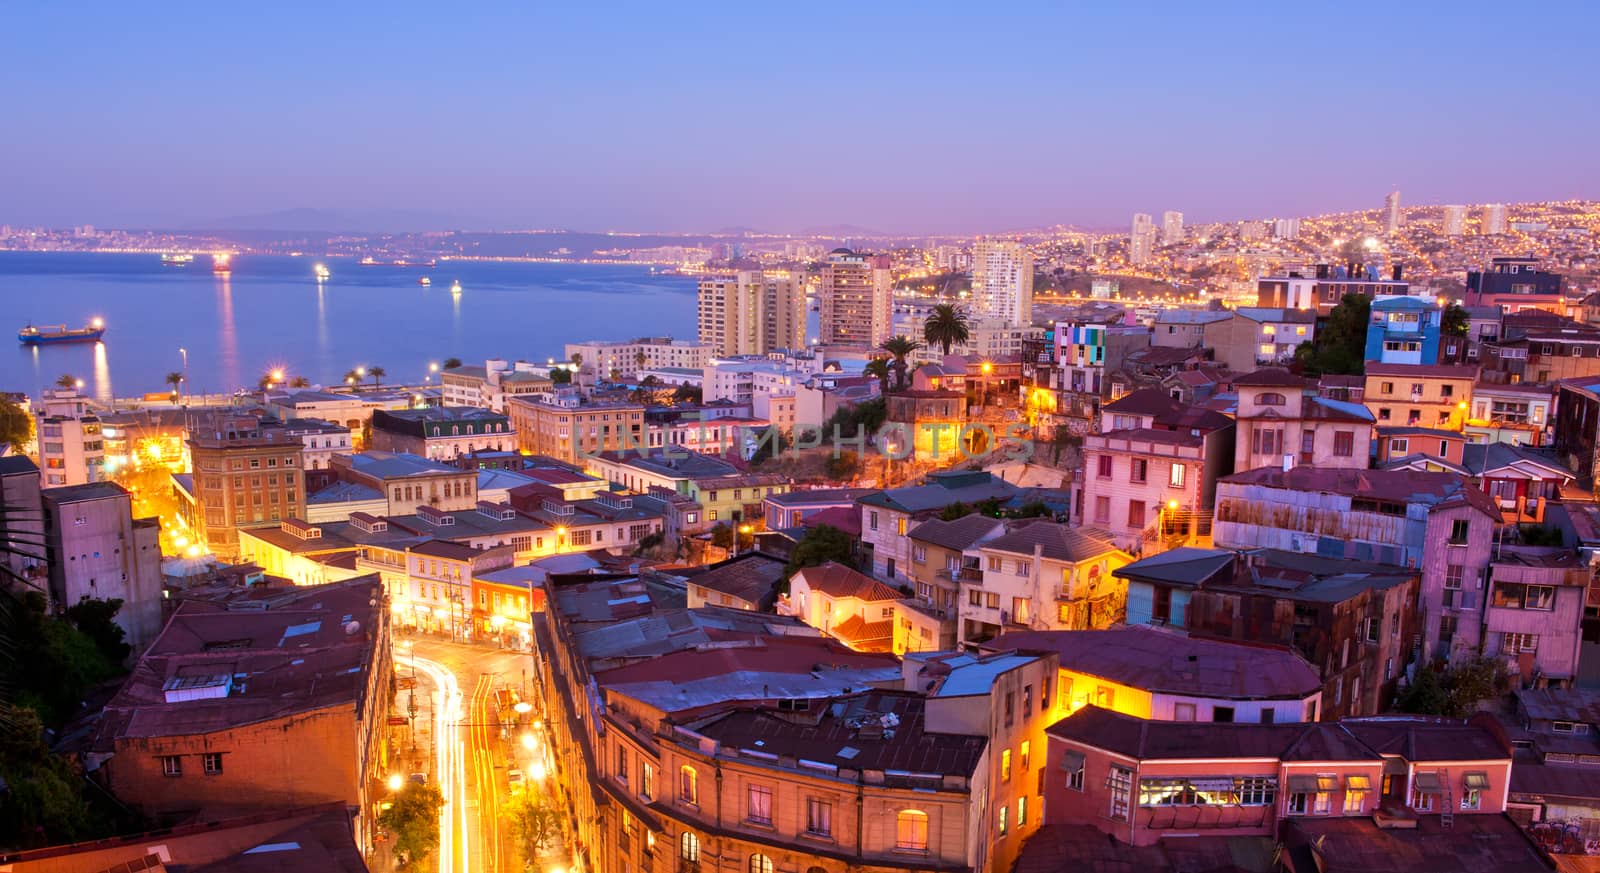 the historic quarter of Valparaíso, declared a UNESCO World Heritage Site in 2003, by night.